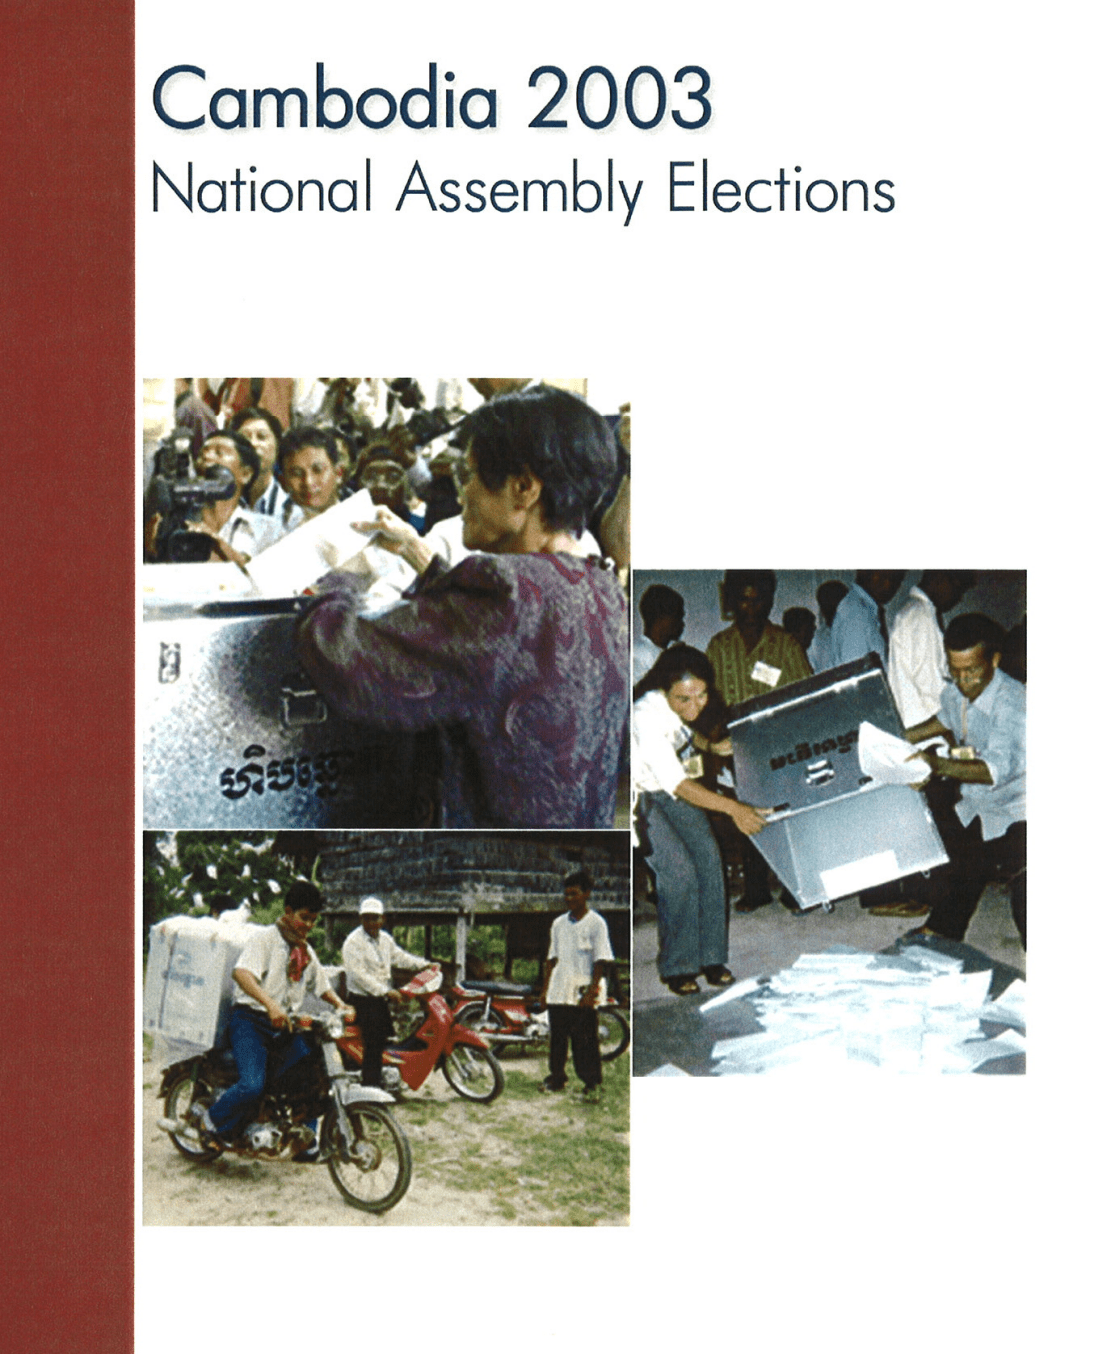 Cambodia 2003 National Assembly Elections